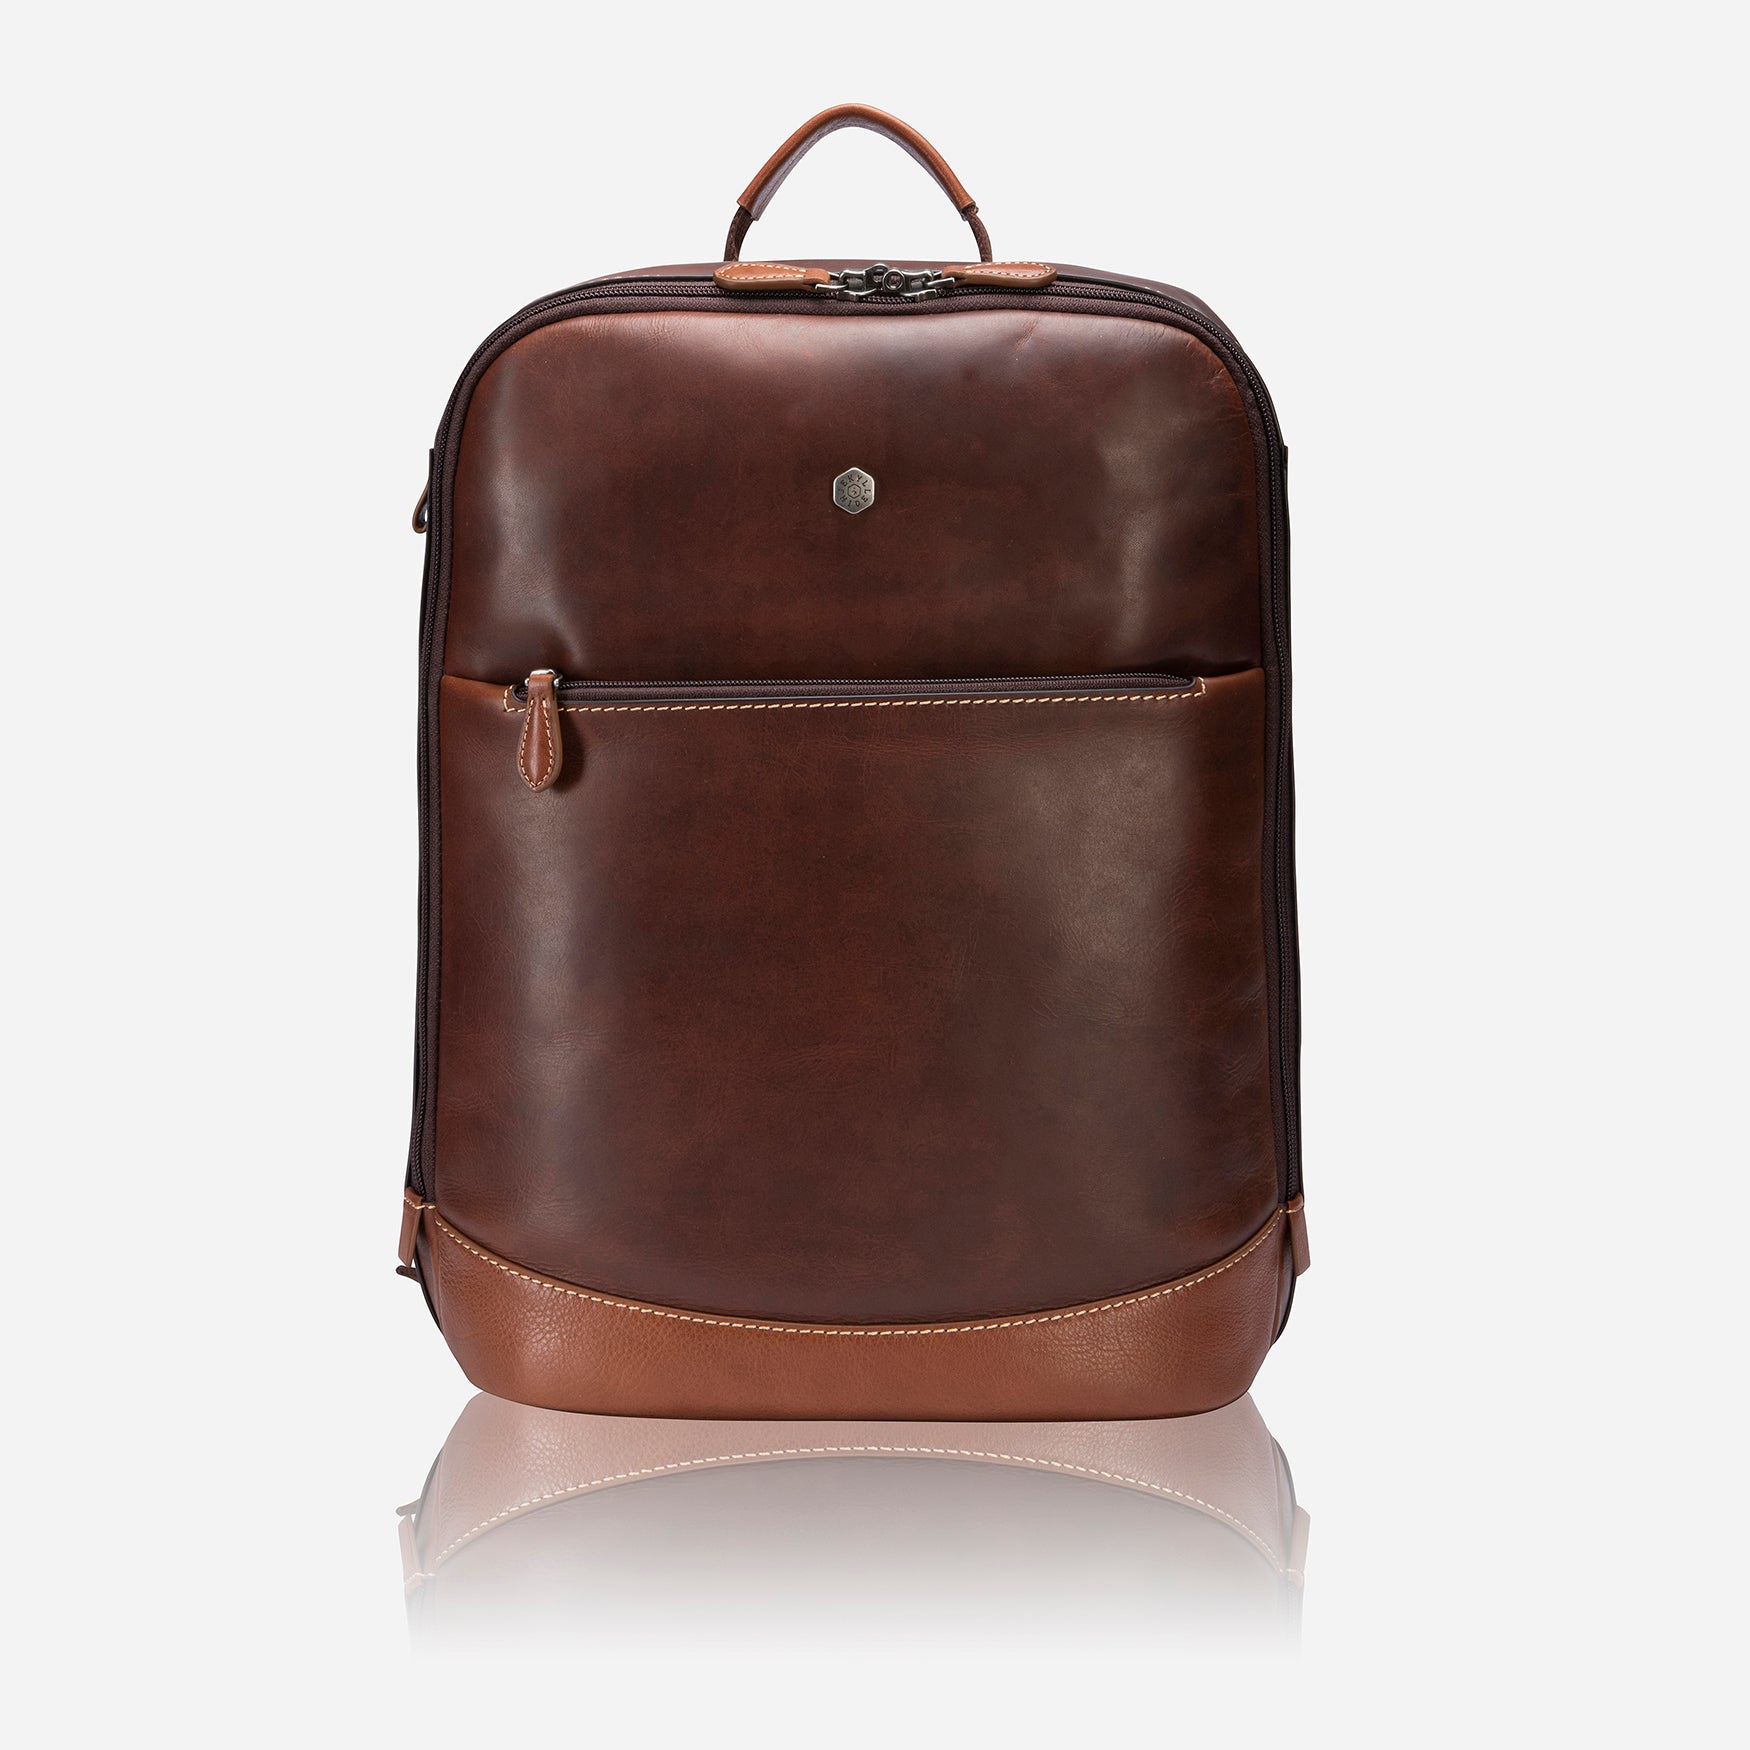 Jekyll & Hide Soho Single Compartment Backpack 41cm, Two Tone